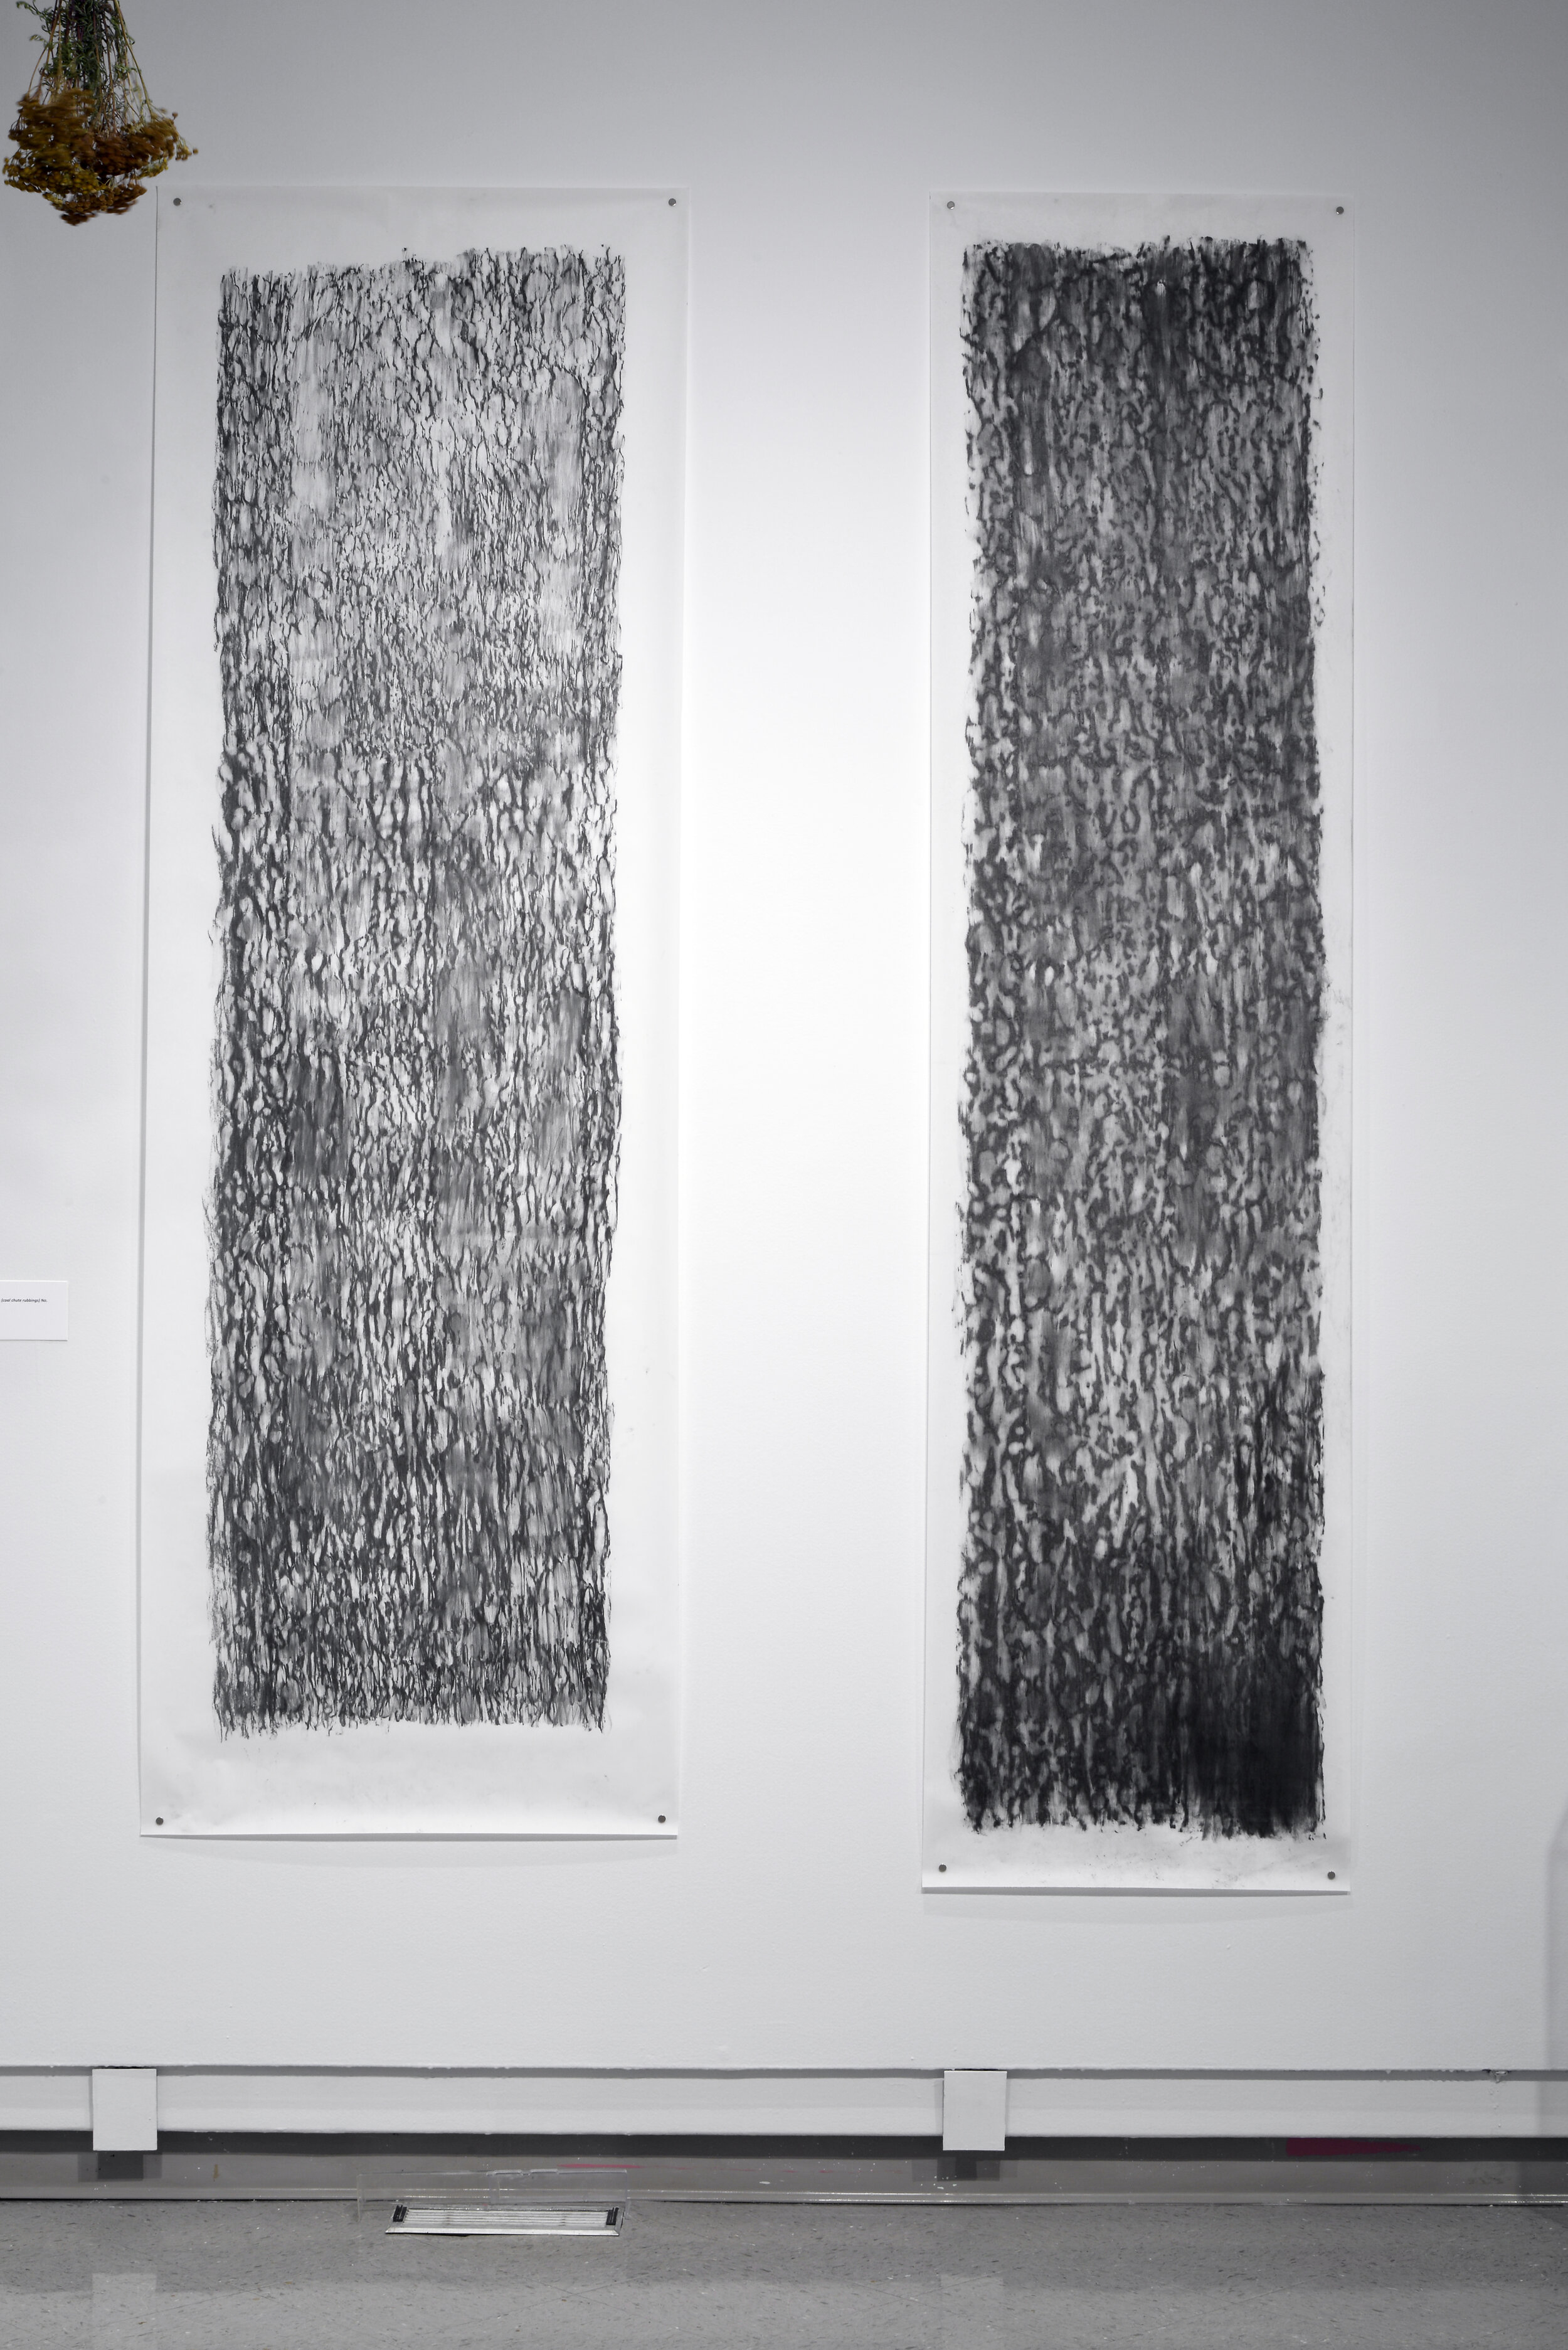  Alana Bartol,  To Dig Holes and Pierce Mountains (coal chute rubbings),  2020, charcoal on vellum. 